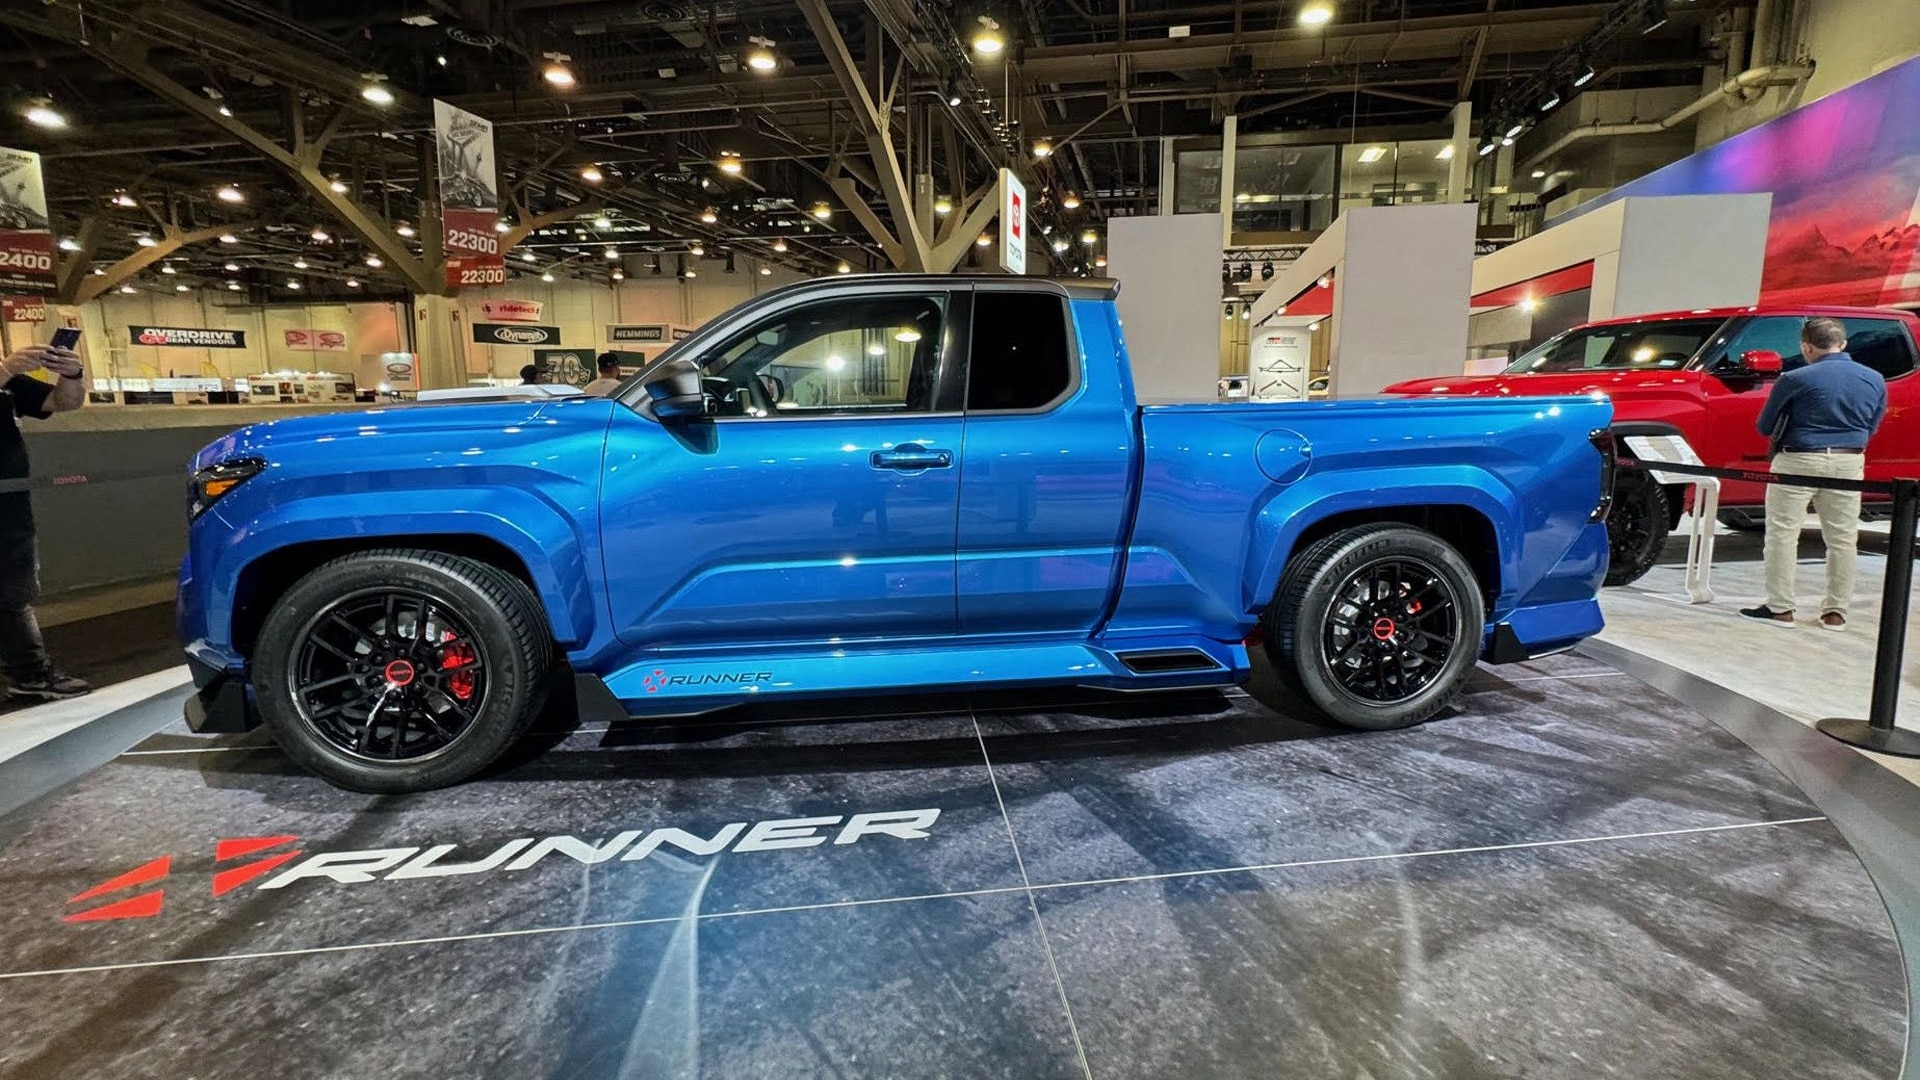 Toyota Tacoma X Runner Is A Street Truck With Twin Turbo V 6